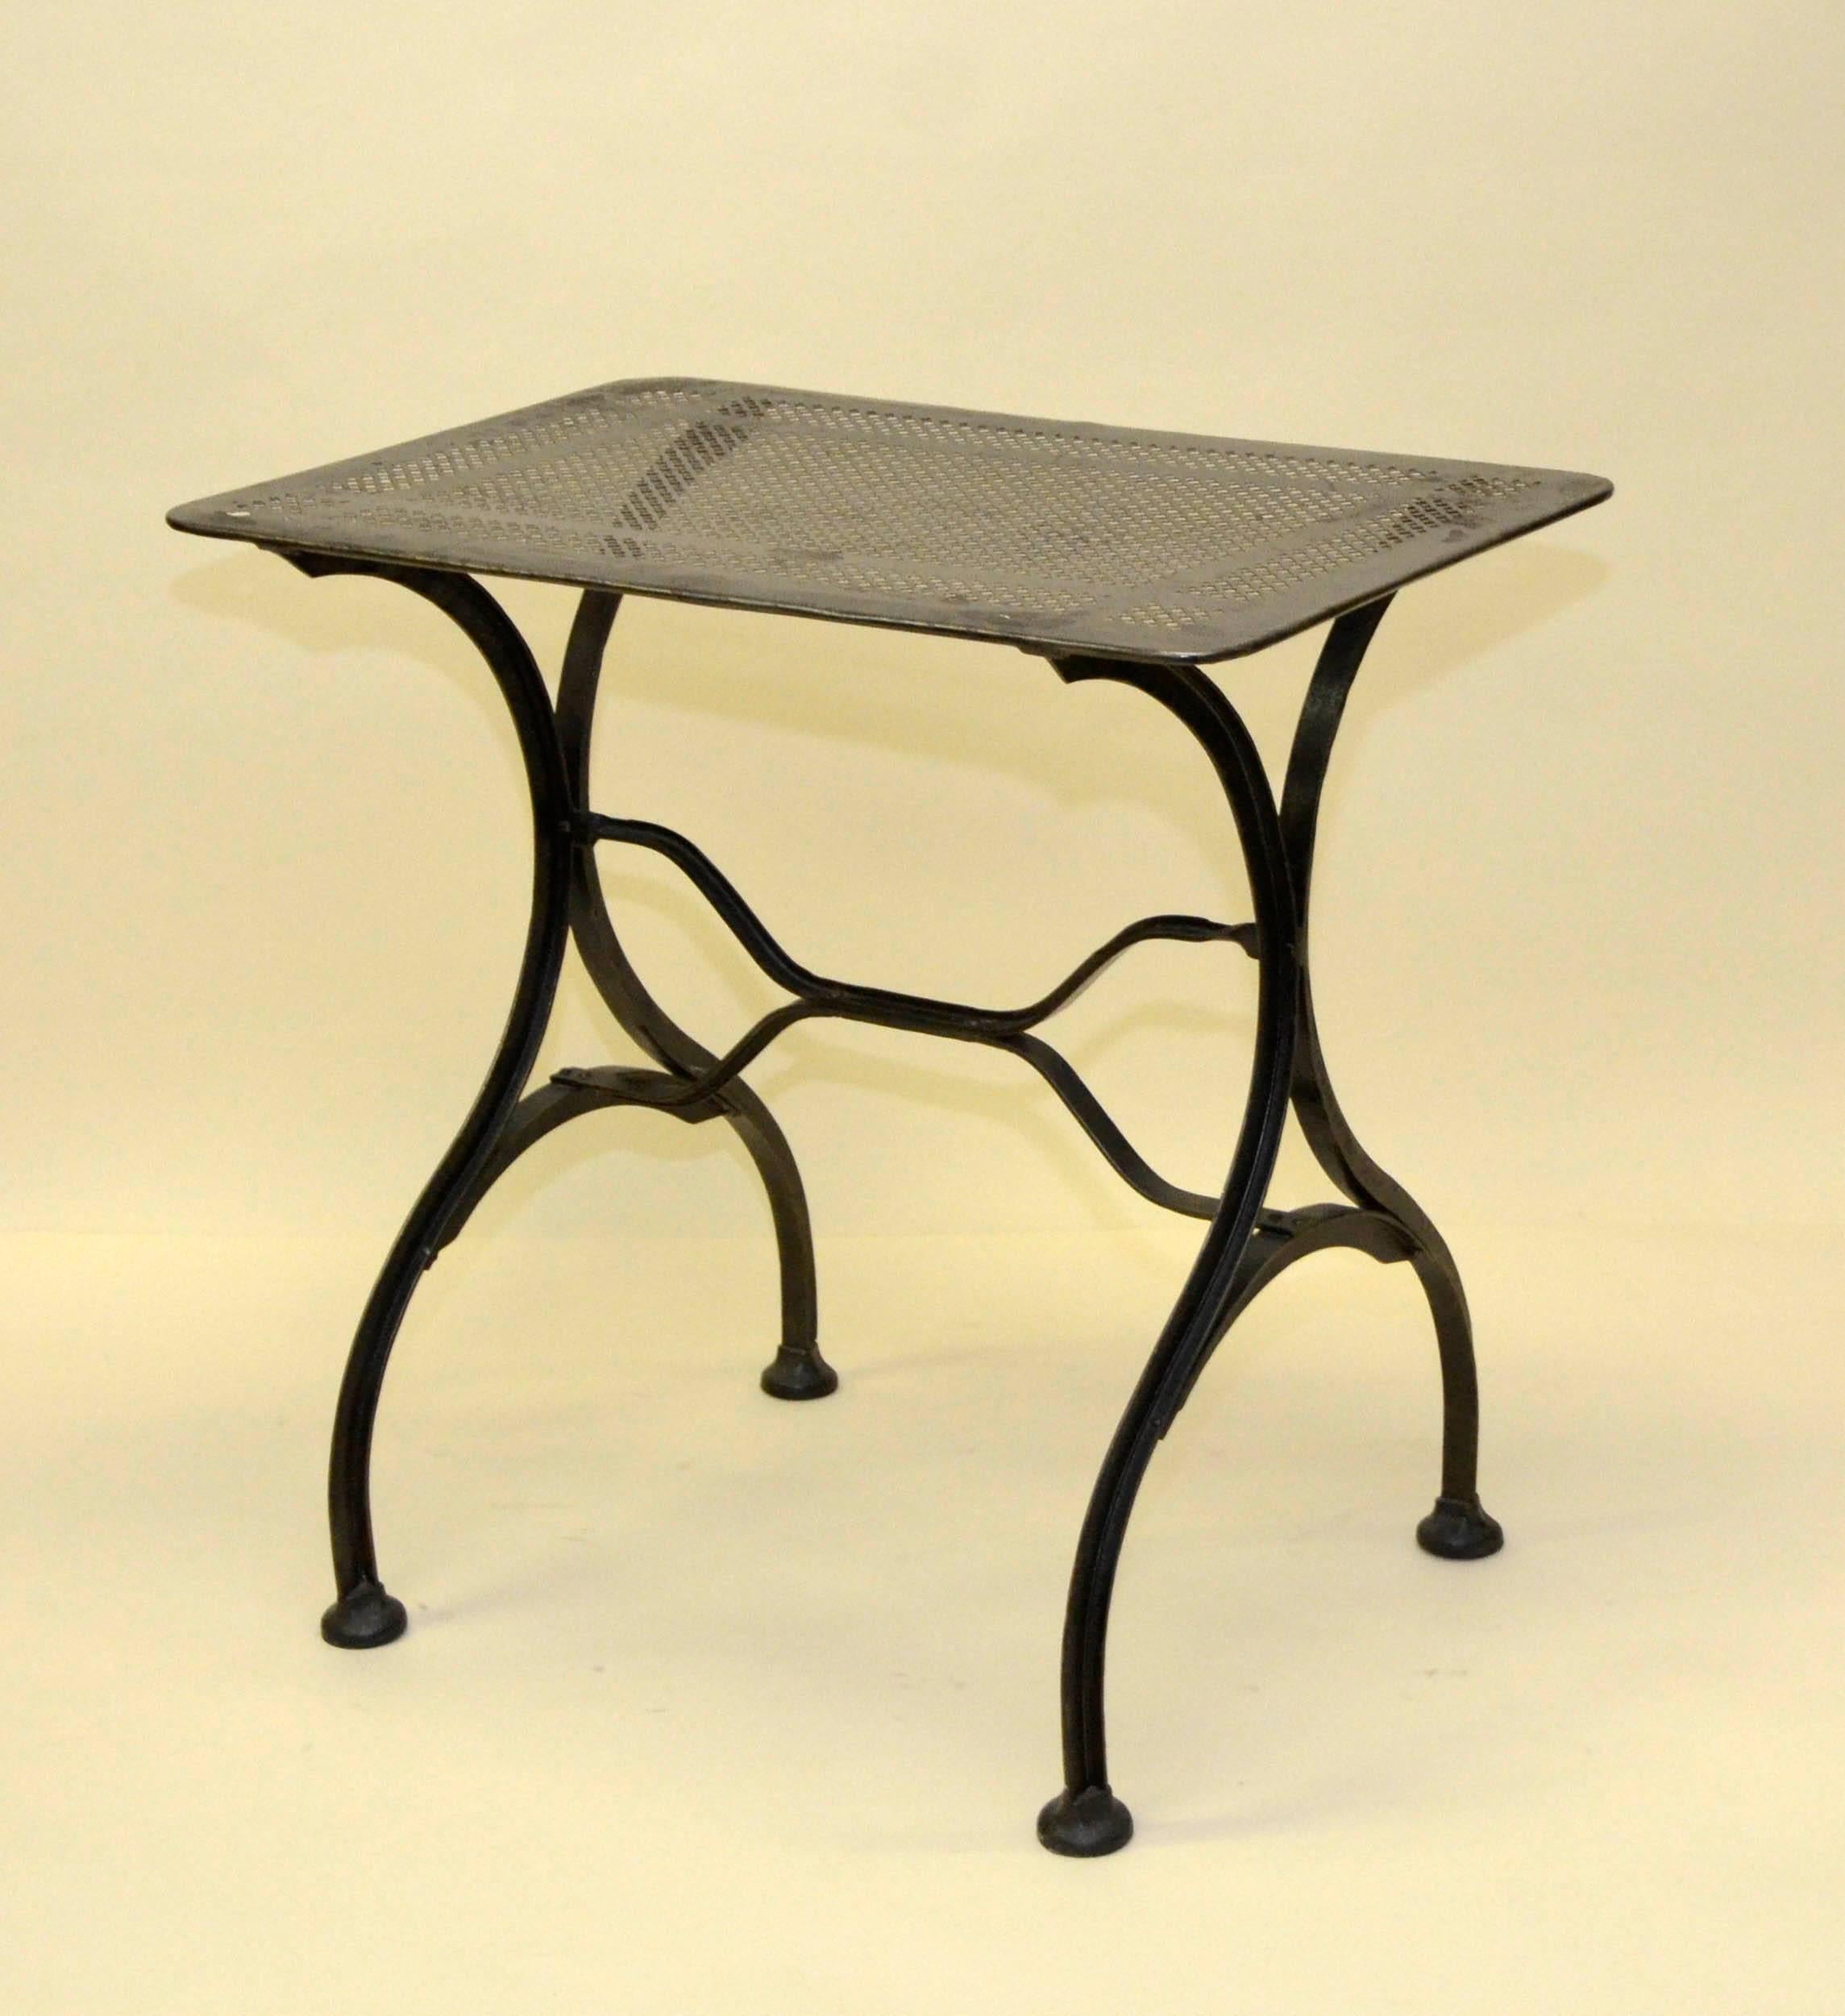 1930s Vintage Italian Stripped Metal Garden Table In Good Condition For Sale In Milan, IT